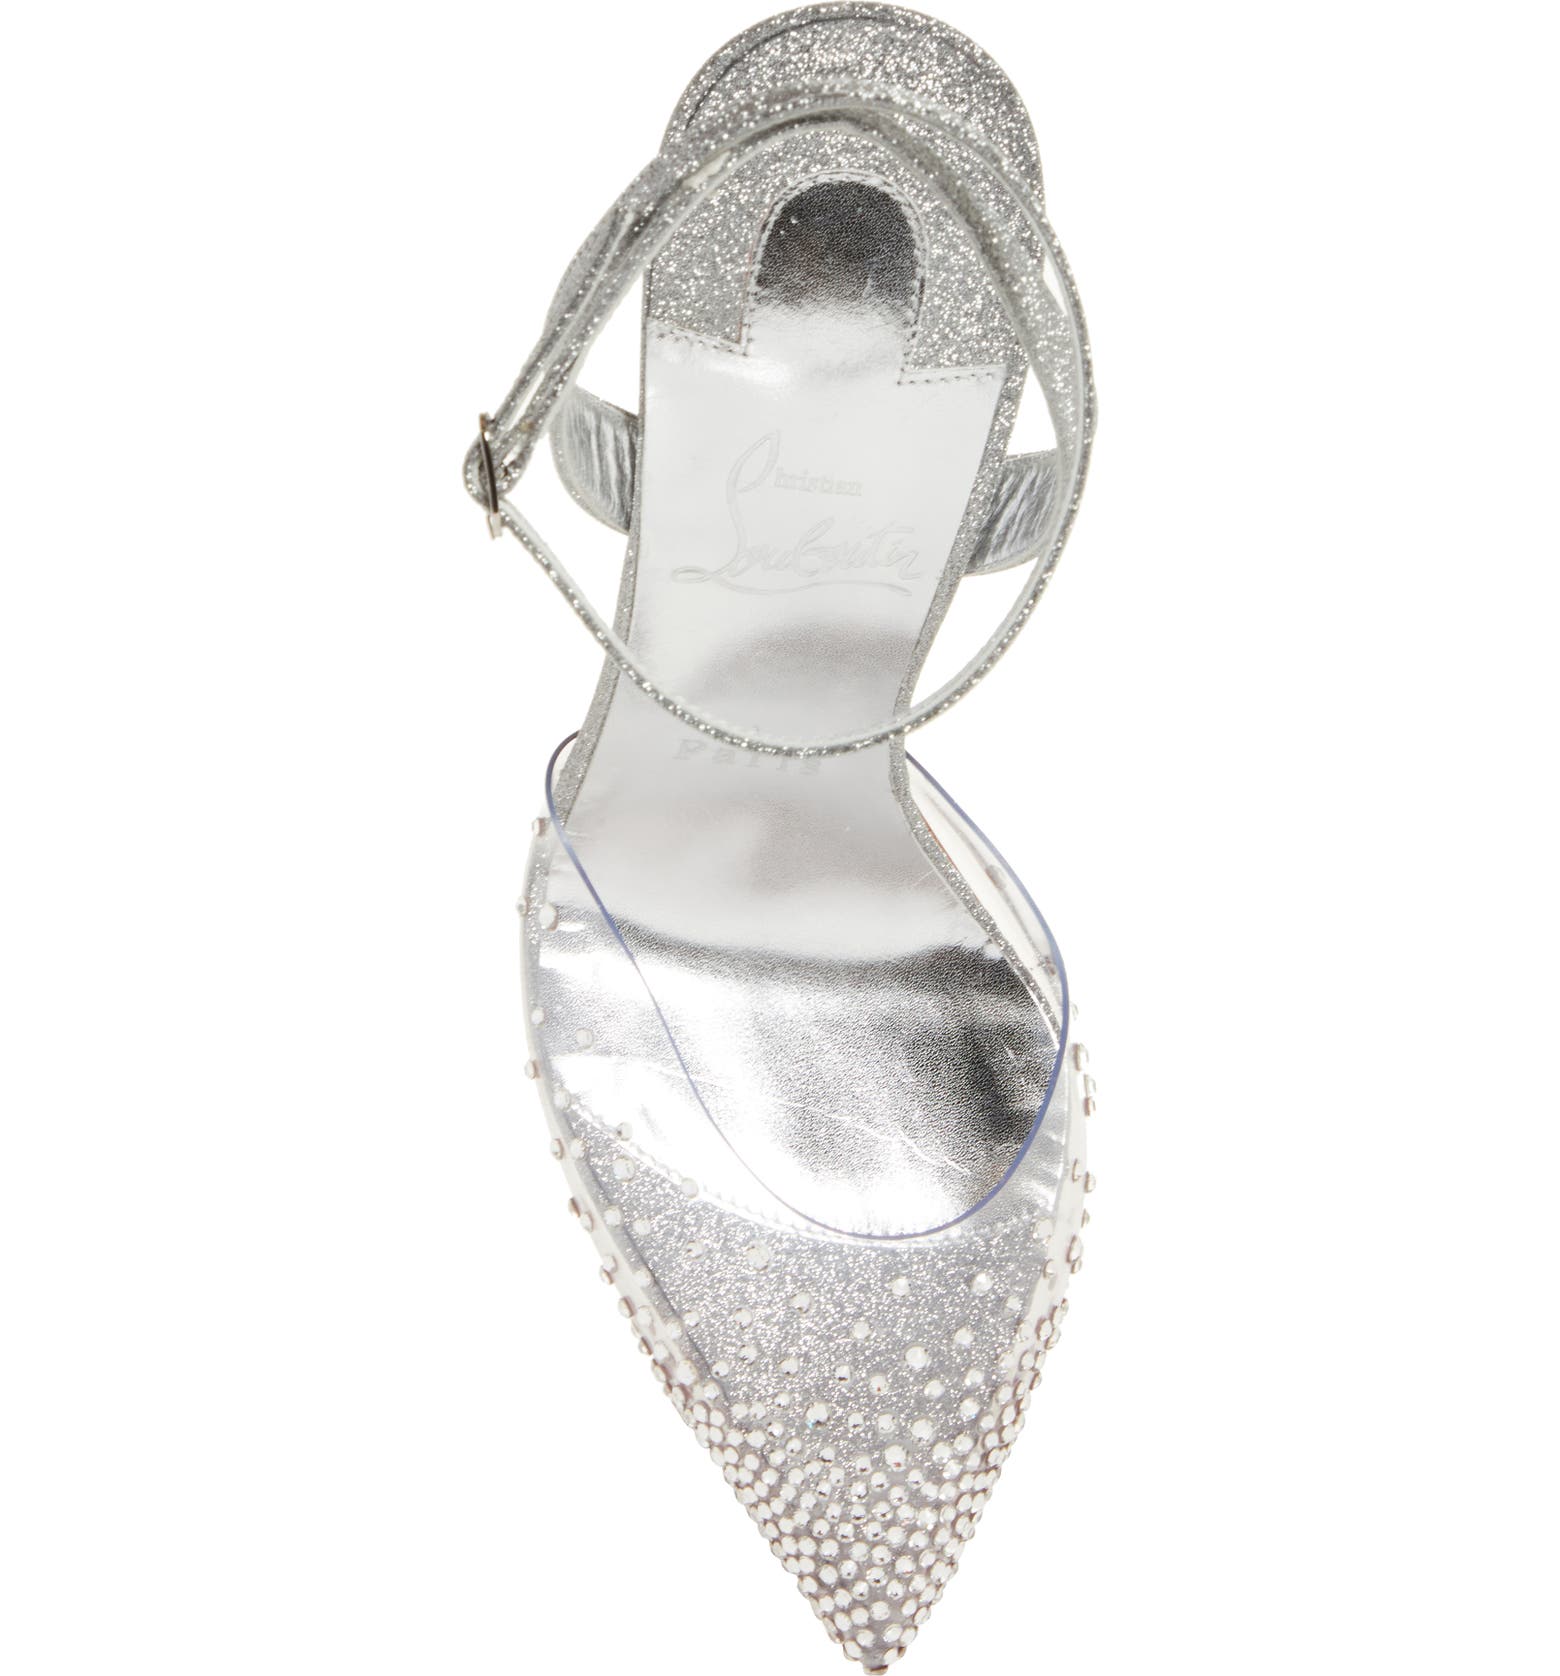 Christian Louboutin Spikaqueen Crystal Ankle Strap Pump (Women) | Nordstrom